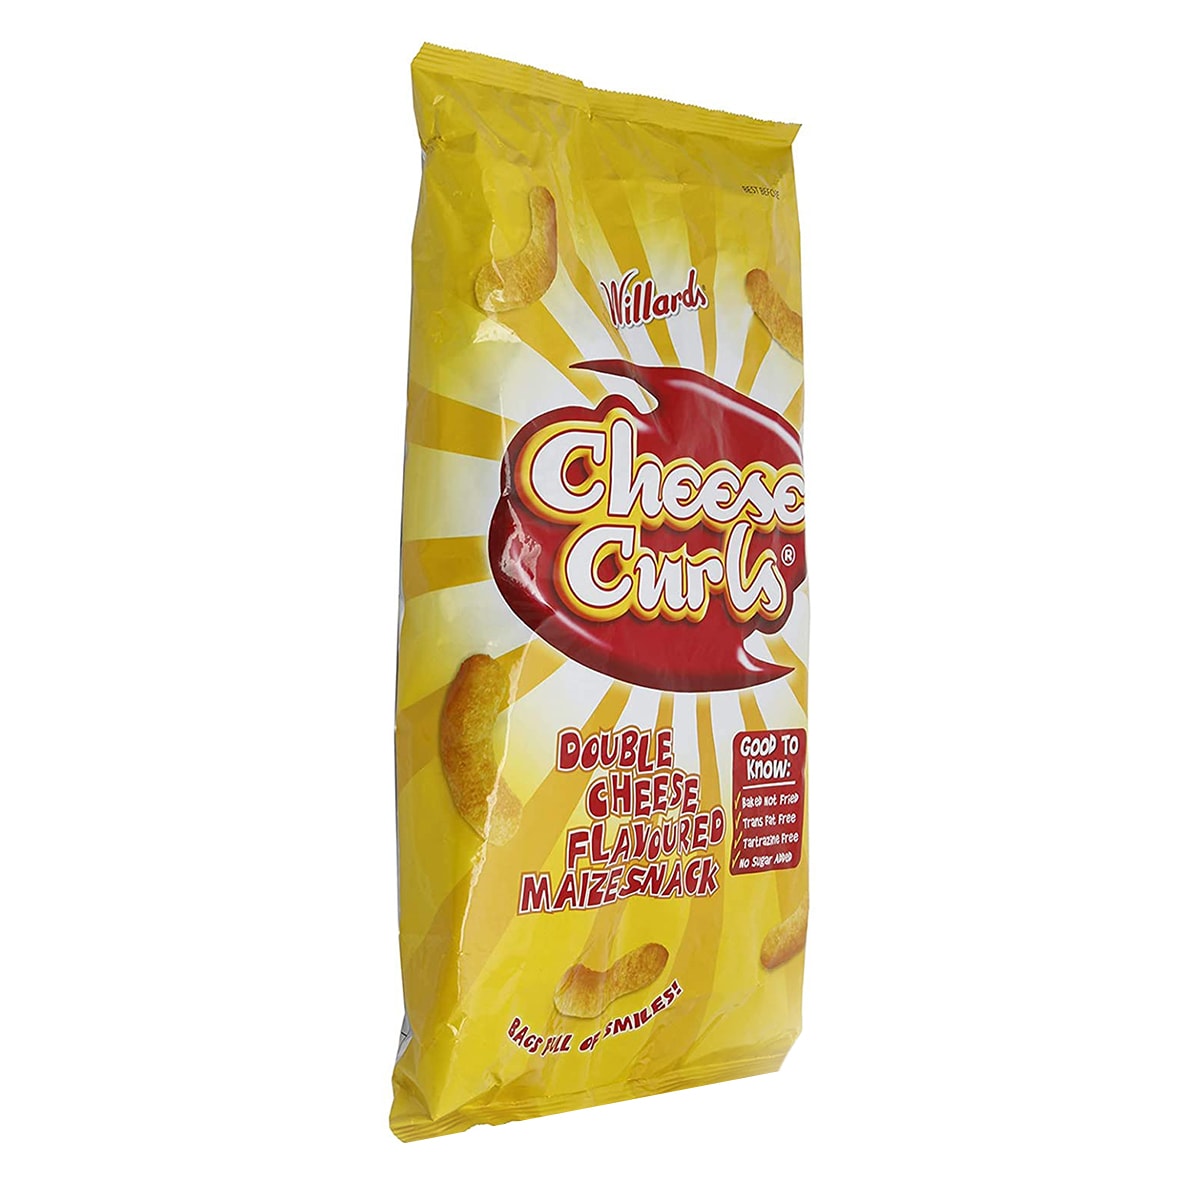 Buy Willards Cheese Curls Double Cheese Flavoured Maize Snack - 150 gm